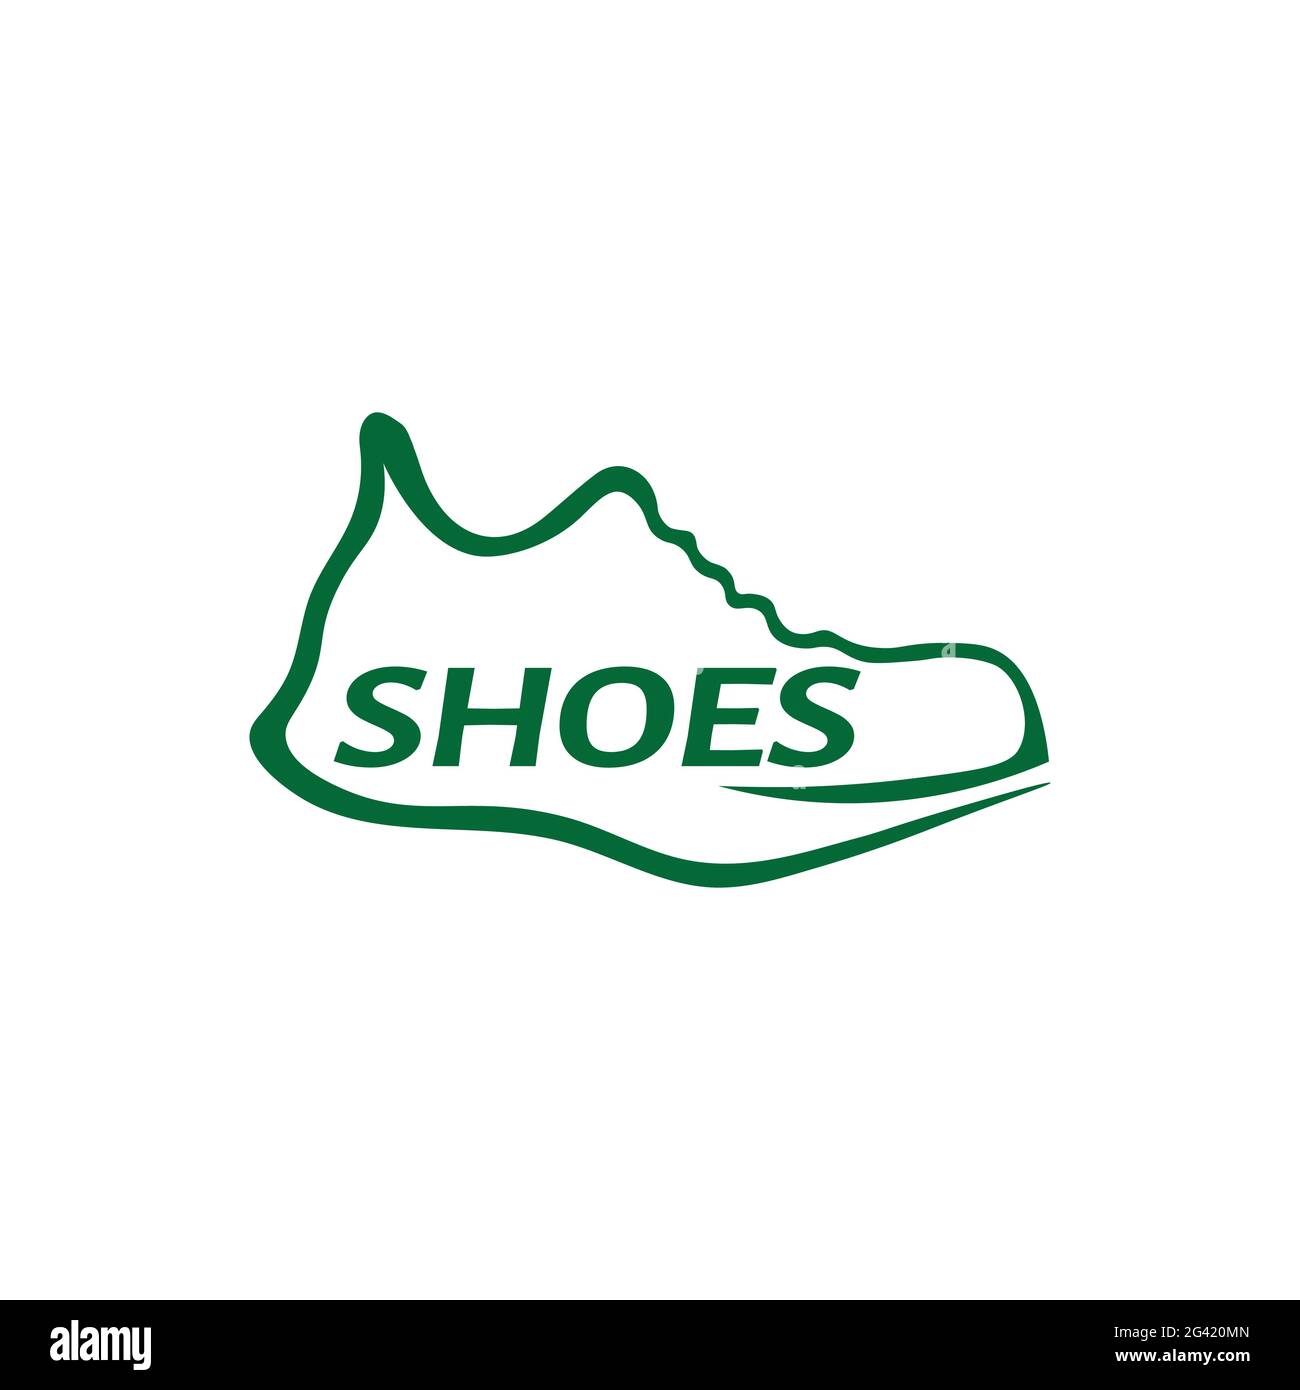 Sneaker Jogging Runner Shoes Line Style Logo Design Template. Suitable for sports shoe brands, shoe stores and sports shops. Stock Vector